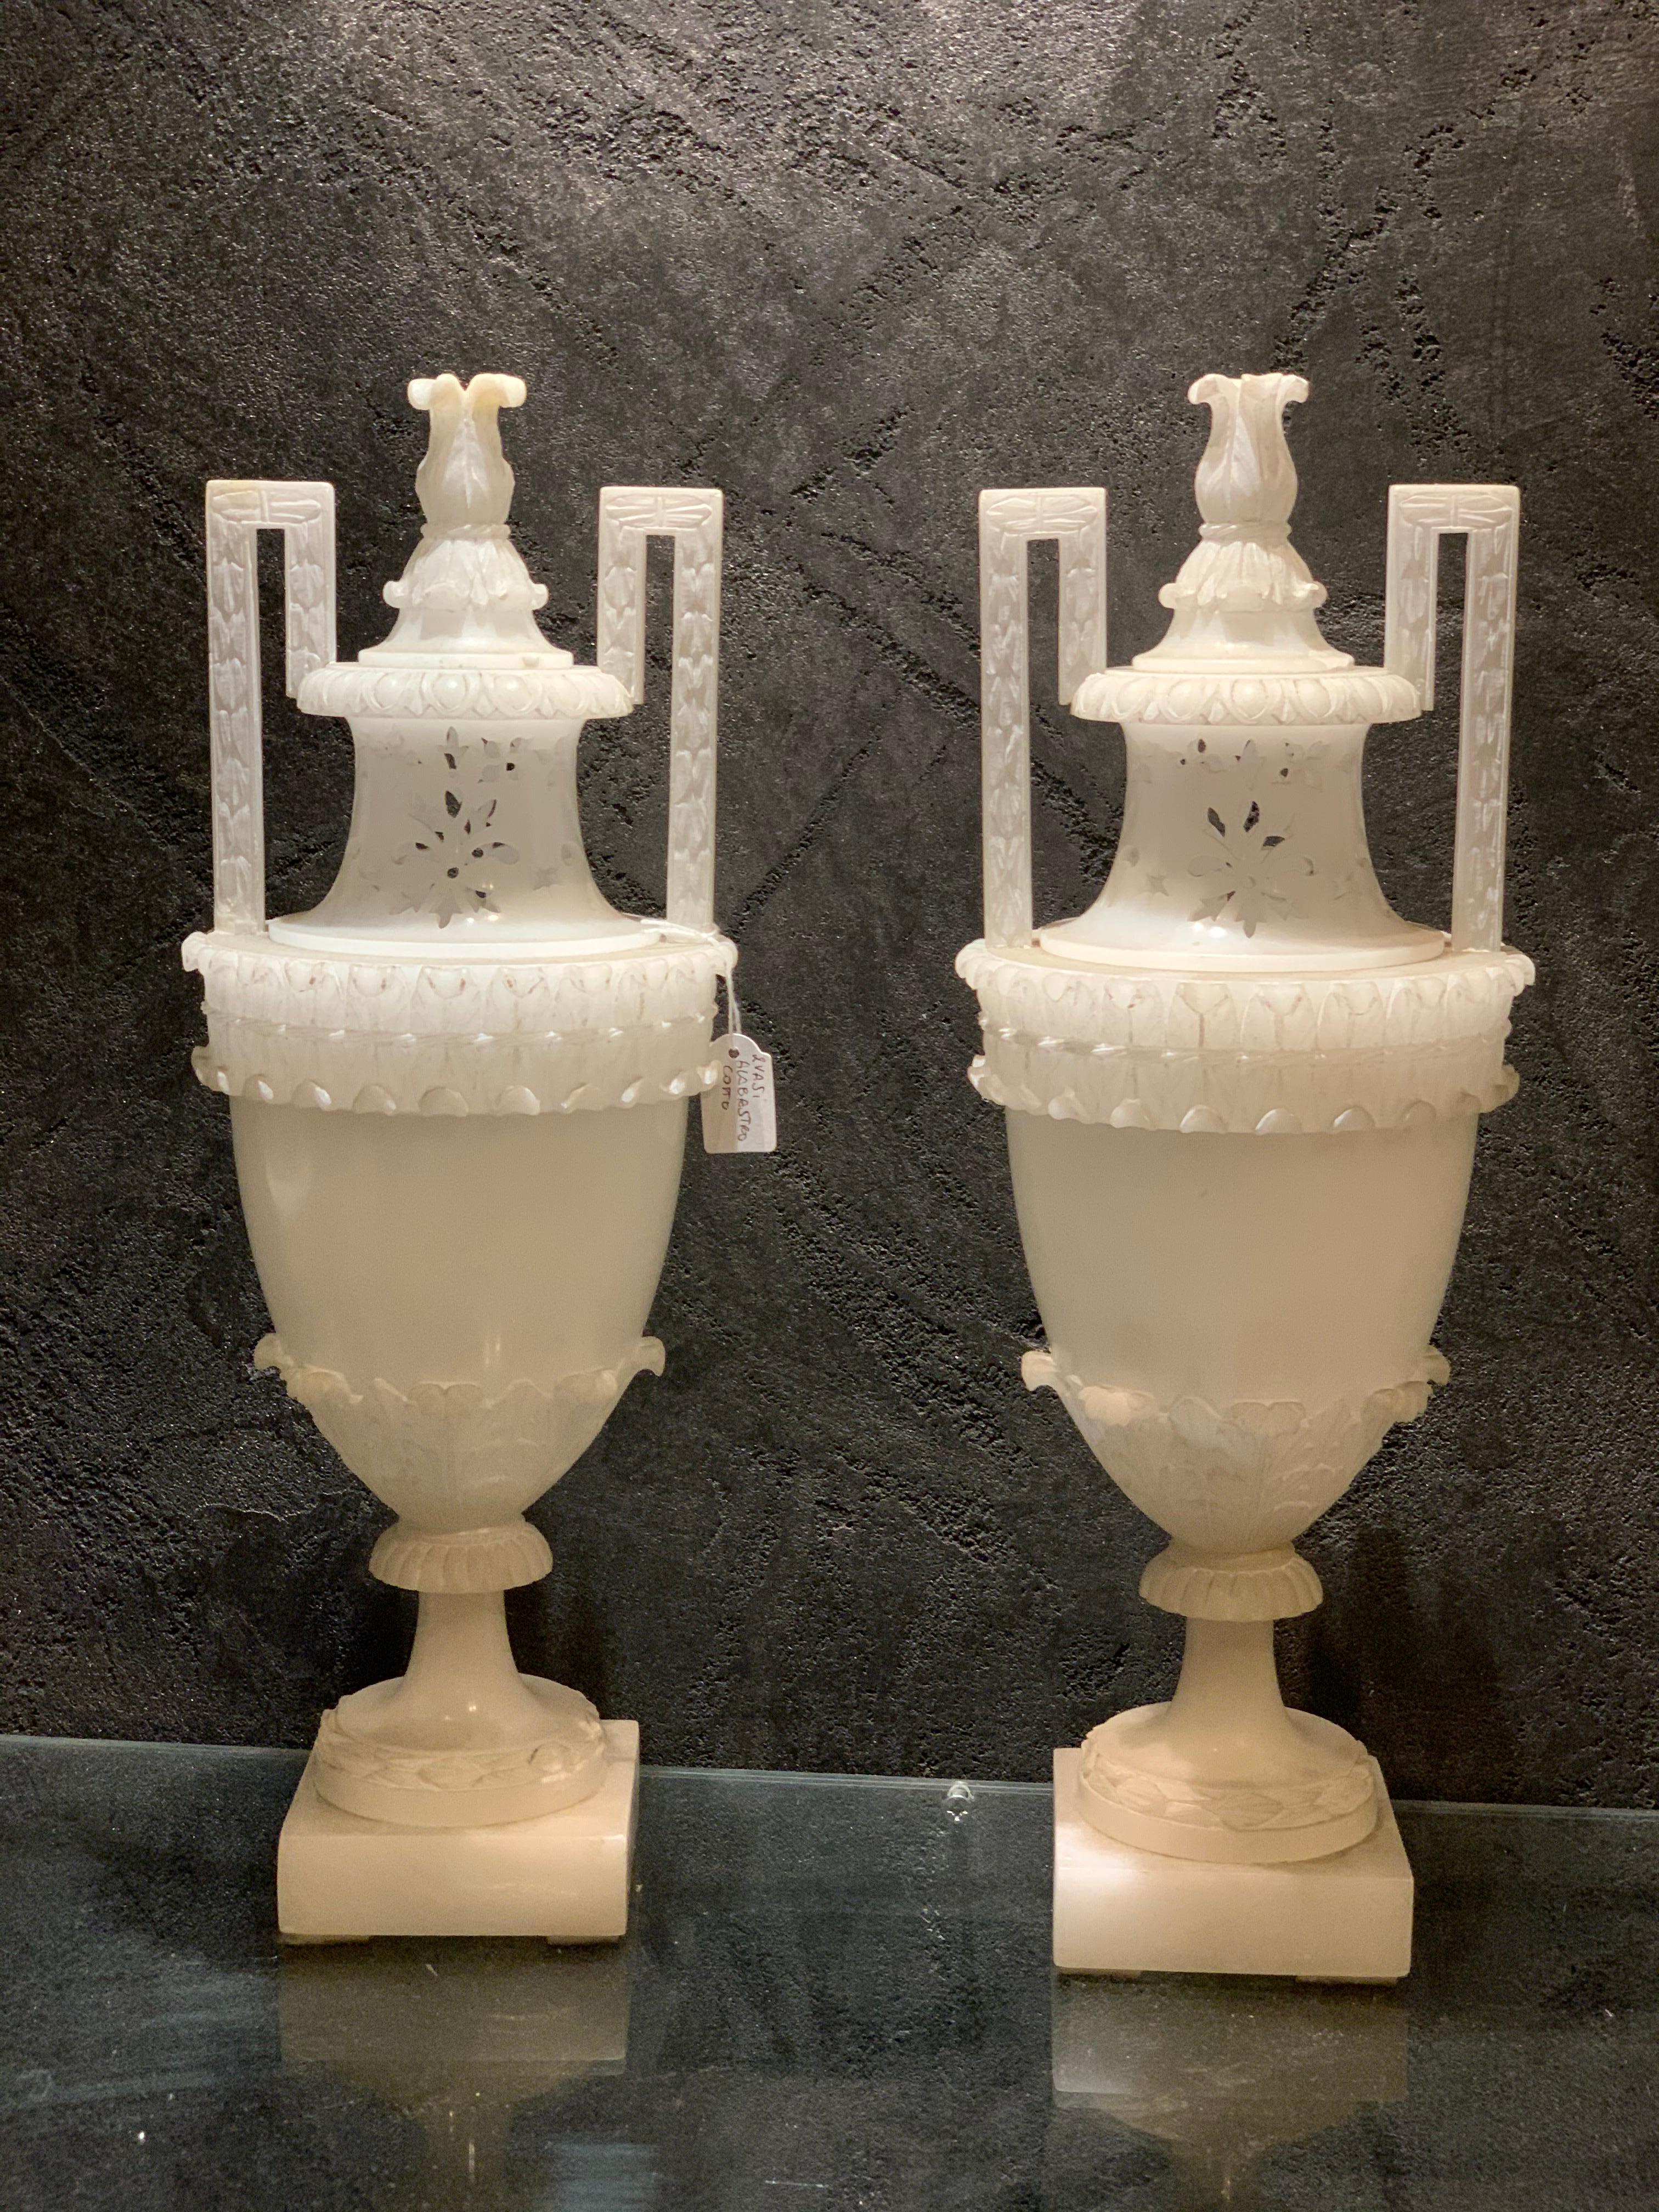 Elegant pair of amphora vases with lids born as incense burners. Made with delicate openwork to emanate perfumes, entirely in cooked alabaster, they were boiled to make them whiter.
This pair of vases has the rarity of being perfect, without any